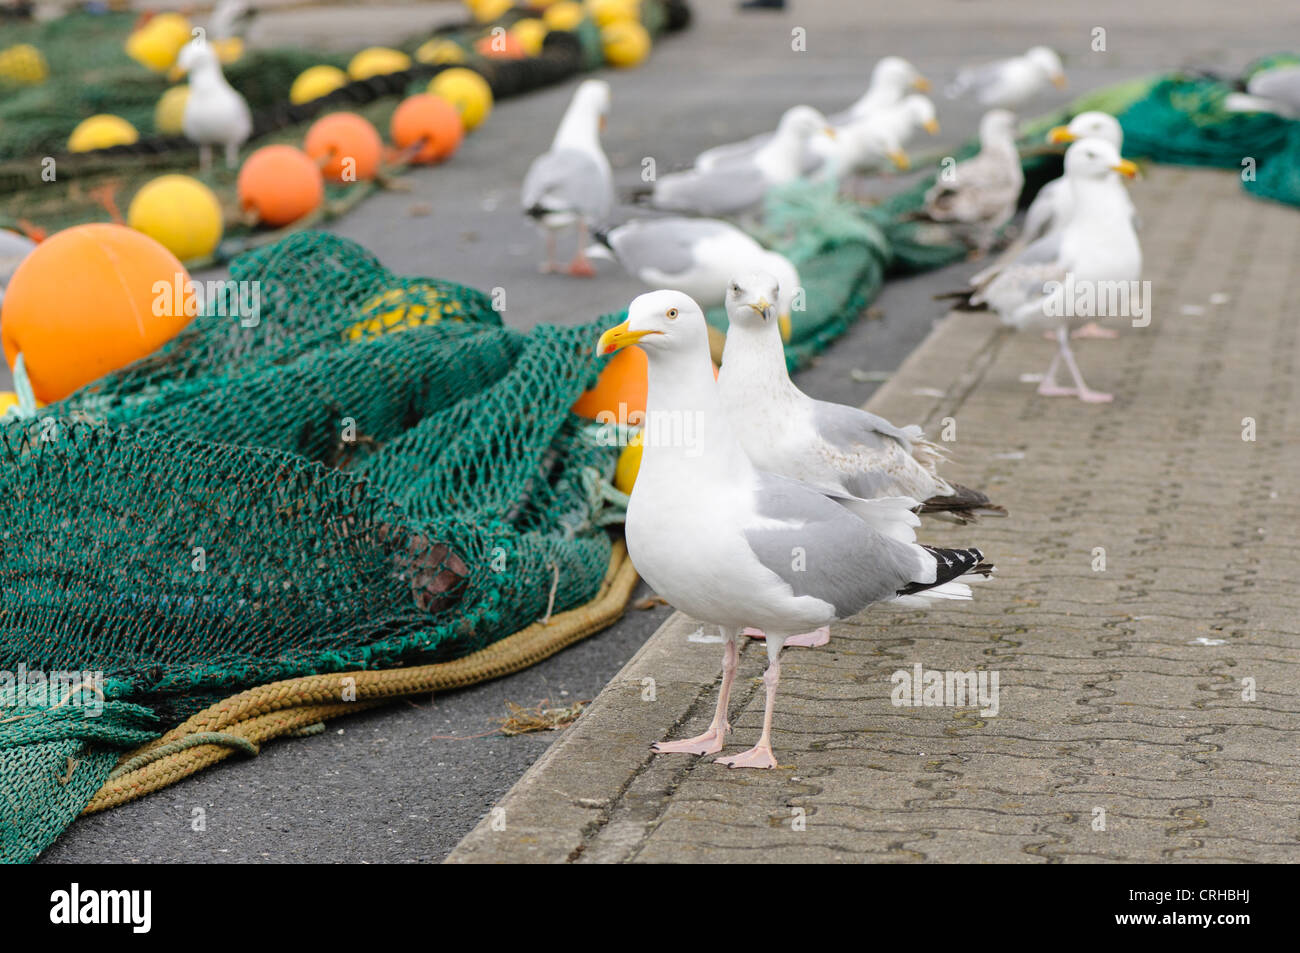 Gulls pick fish pieces from a fishing net as it is laid out to dry at a harbour Stock Photo